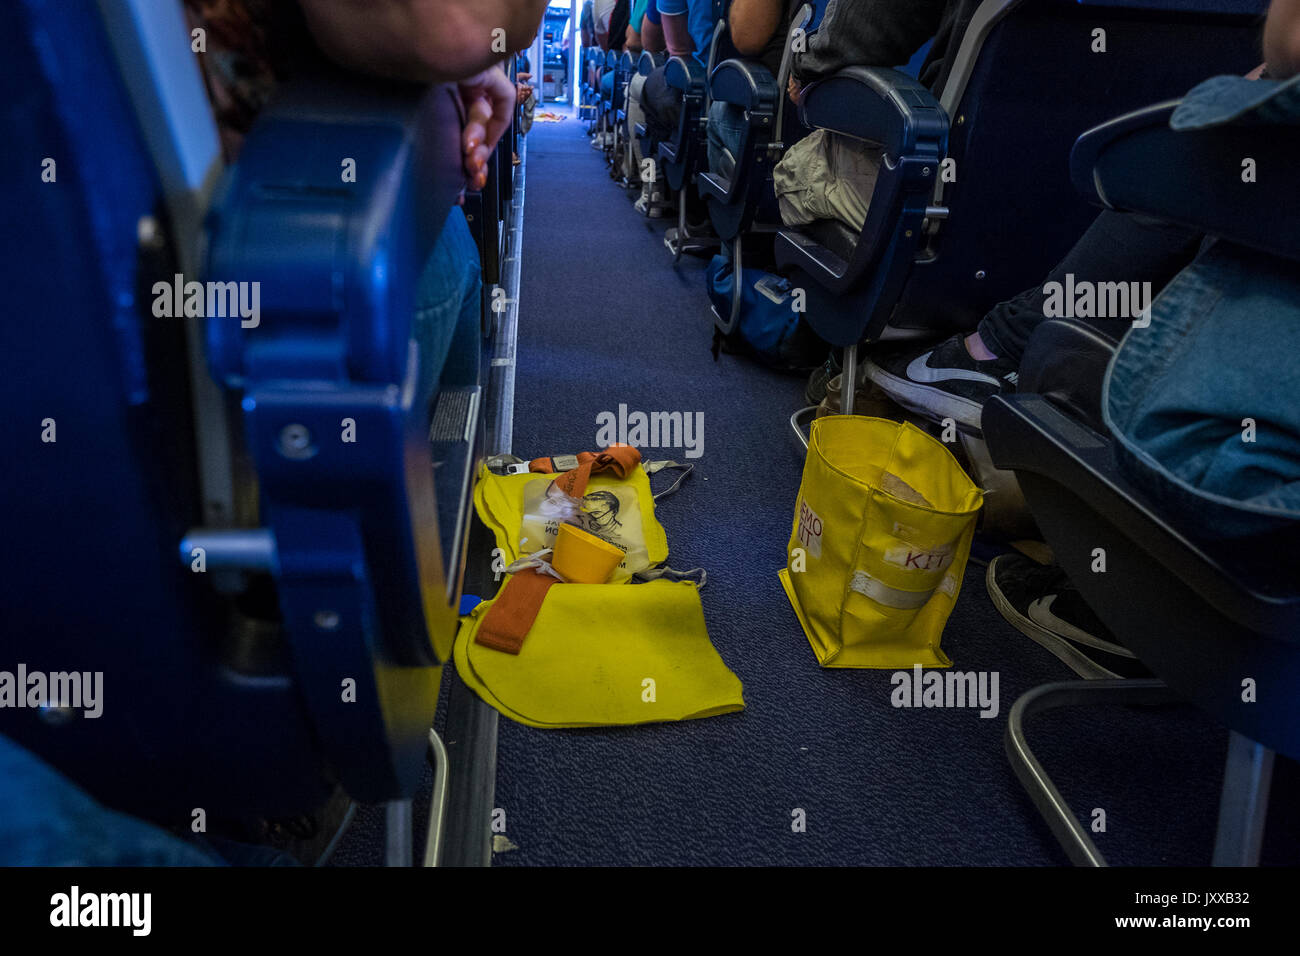 Demo kit, oxygen mask and lifevest on the floor in the aisle of a Ryanair flight before the crew do the safety demonstration, Reina Sofia airport, Ten Stock Photo